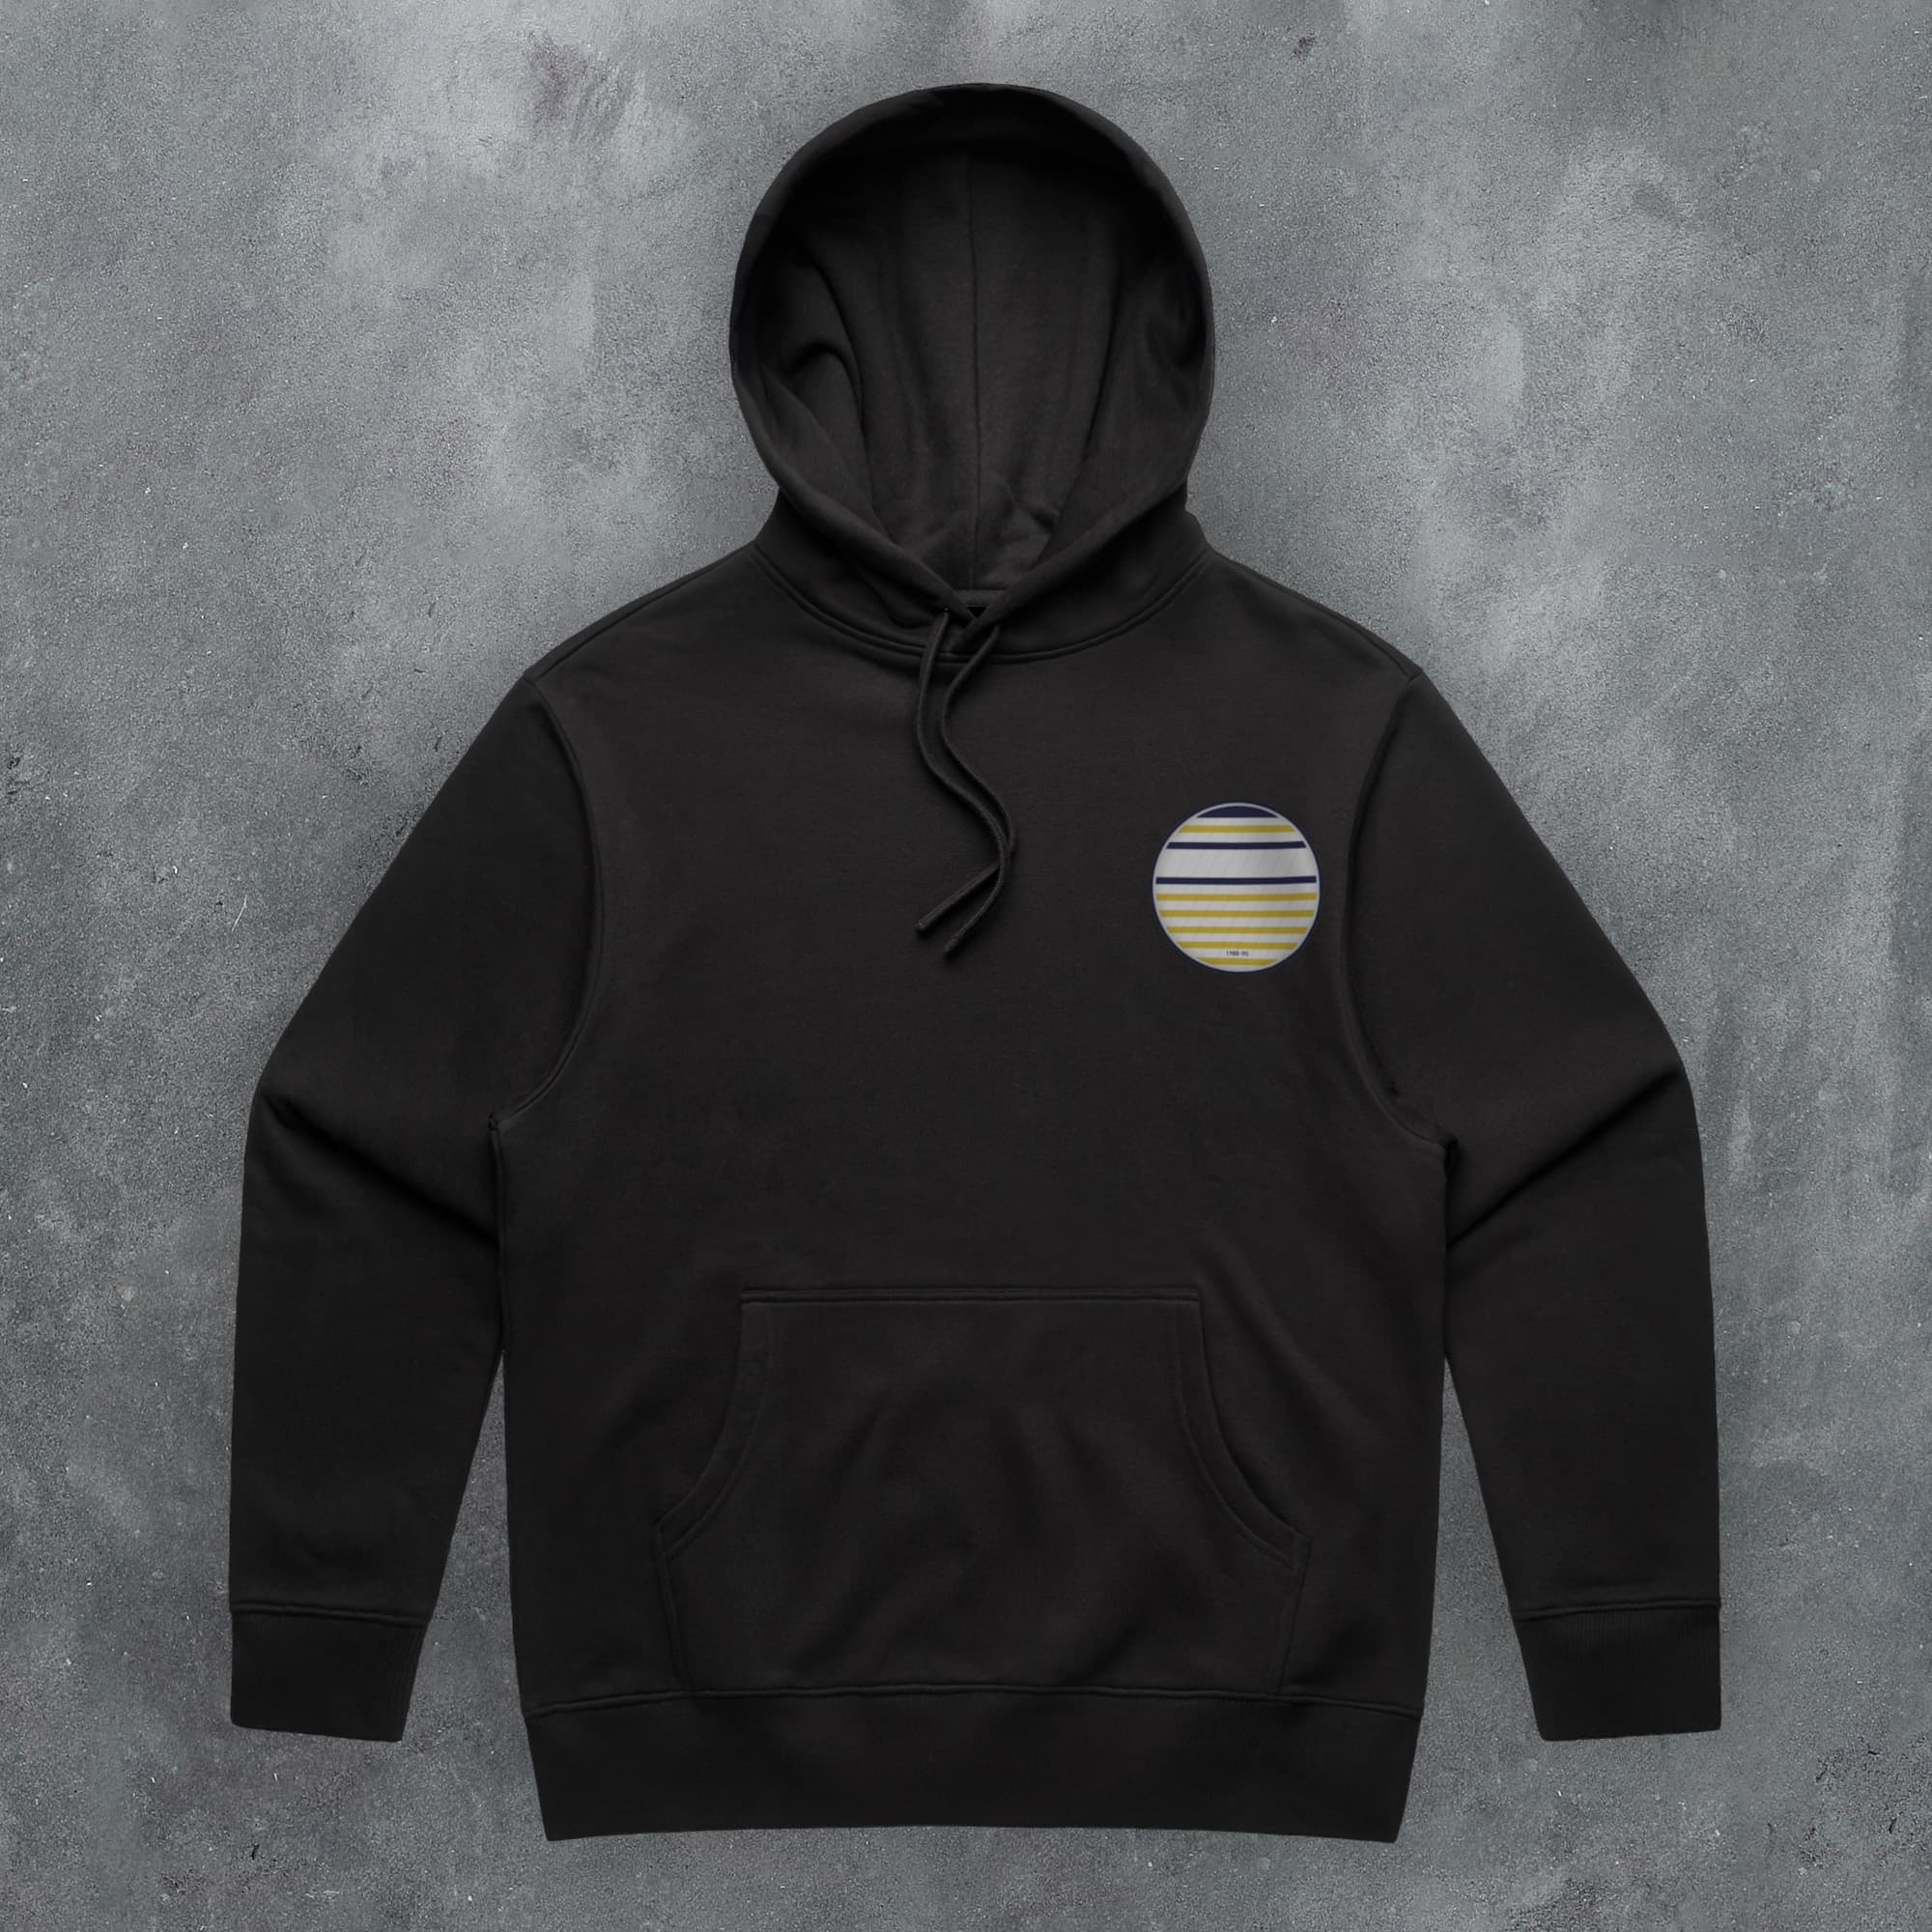 a black hoodie with a striped circle on it